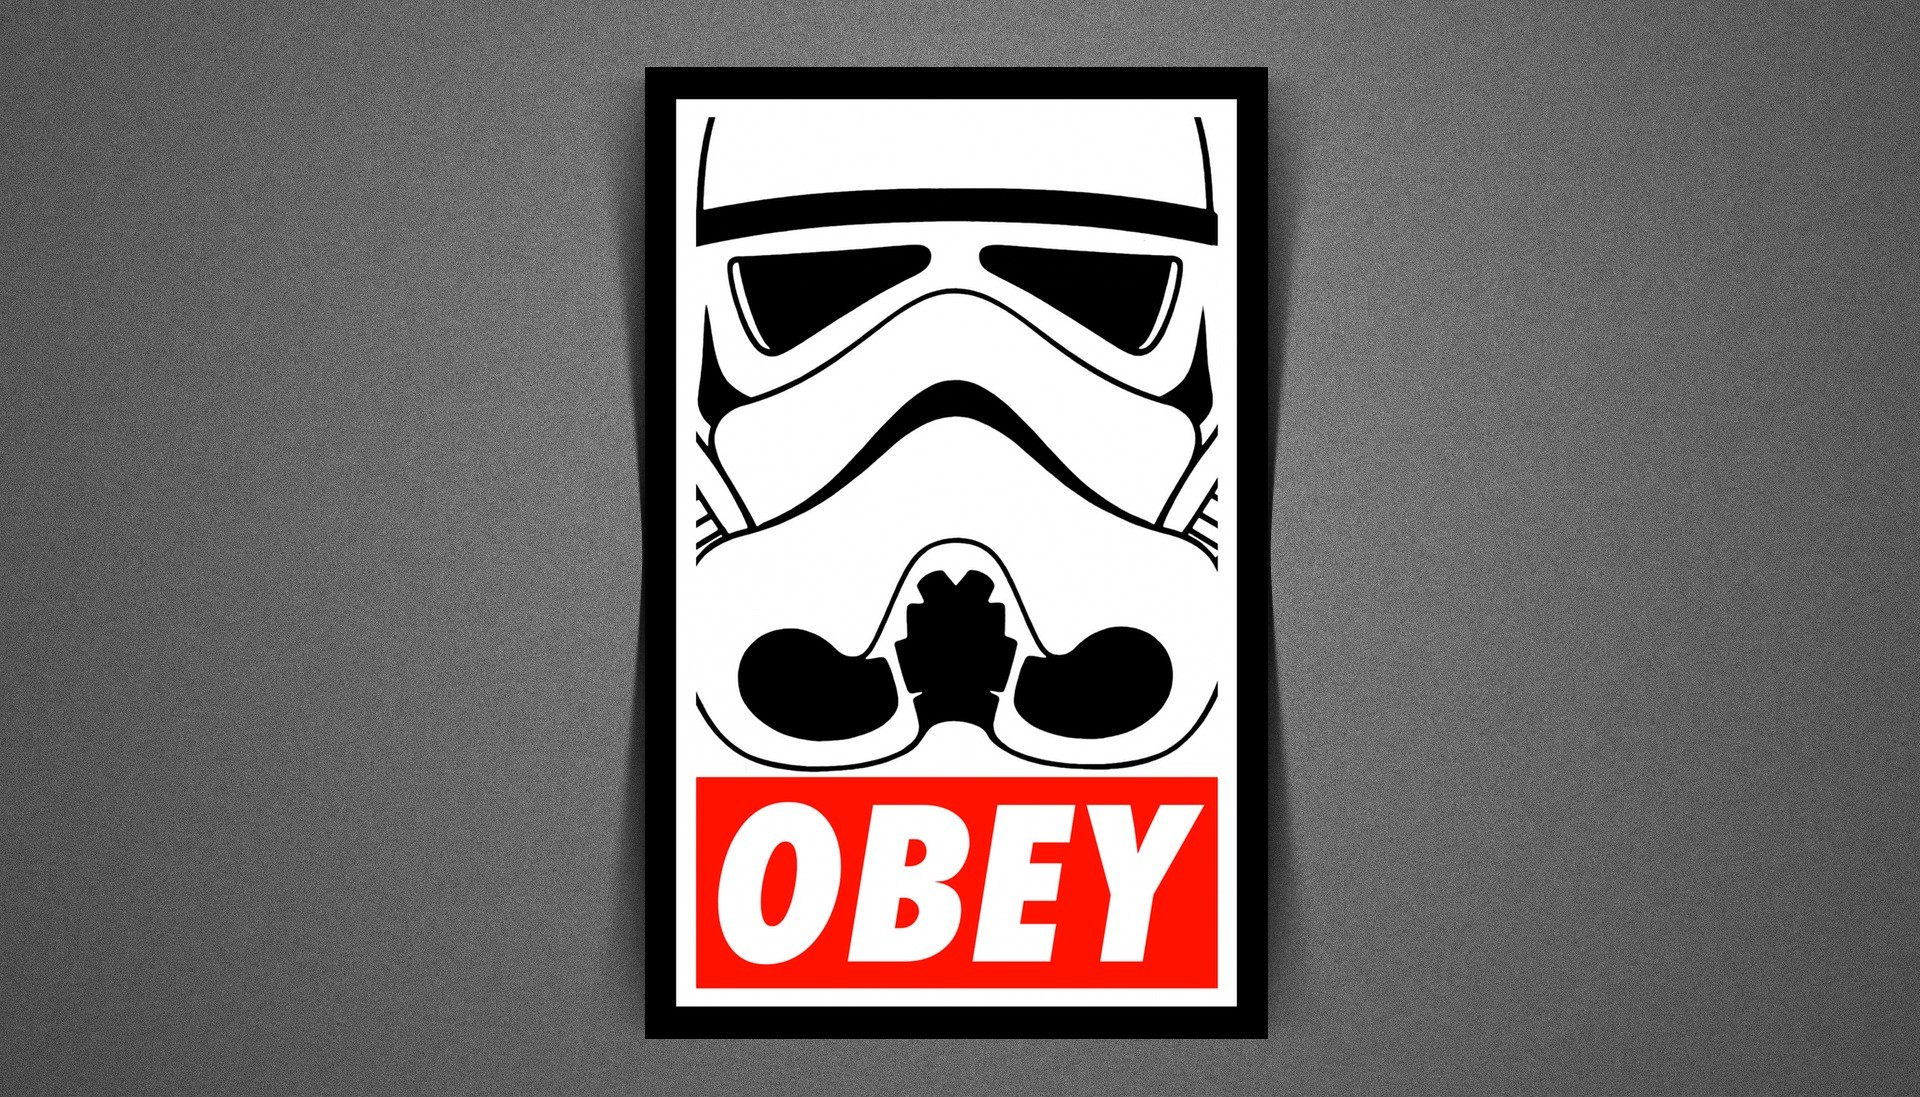  Obey  wallpaper   Download free awesome wallpapers  for 